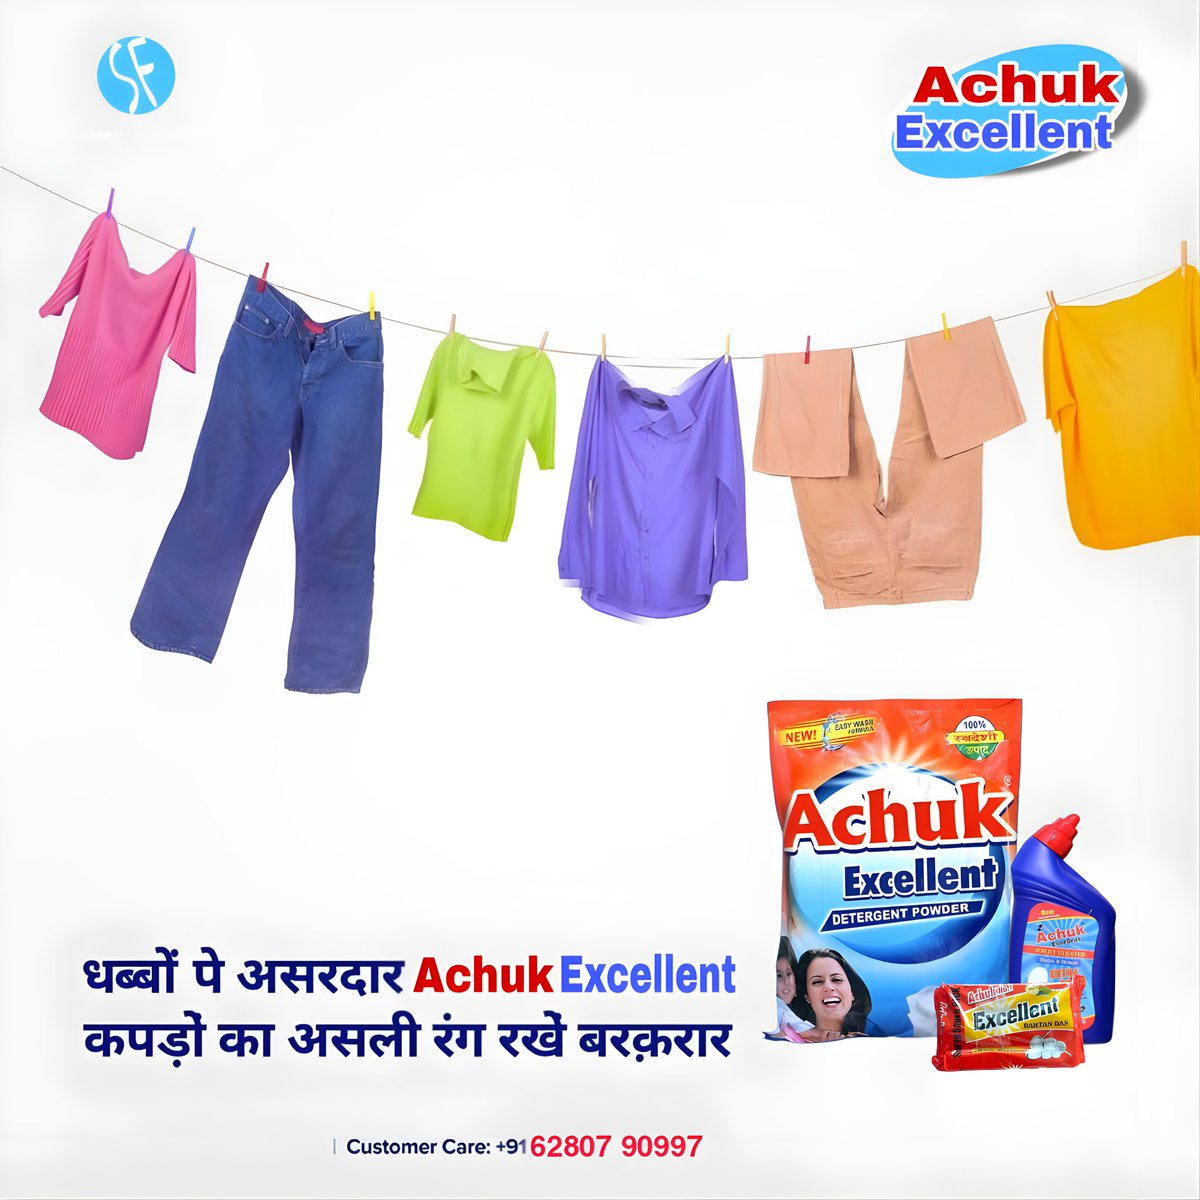 #achukexcellent #Achukdetergnt #LaundrySolution  #DeepClean #like #EffectiveCleaning #LaundryCare #SpotlessResults #FabricCare #PowerfulFormula #LaundryDay #LaundryRoutine #ClothingCare #GentleClean #ToughStains #LaundryEssential #top10detergentpowder #love #laundry #cleaning